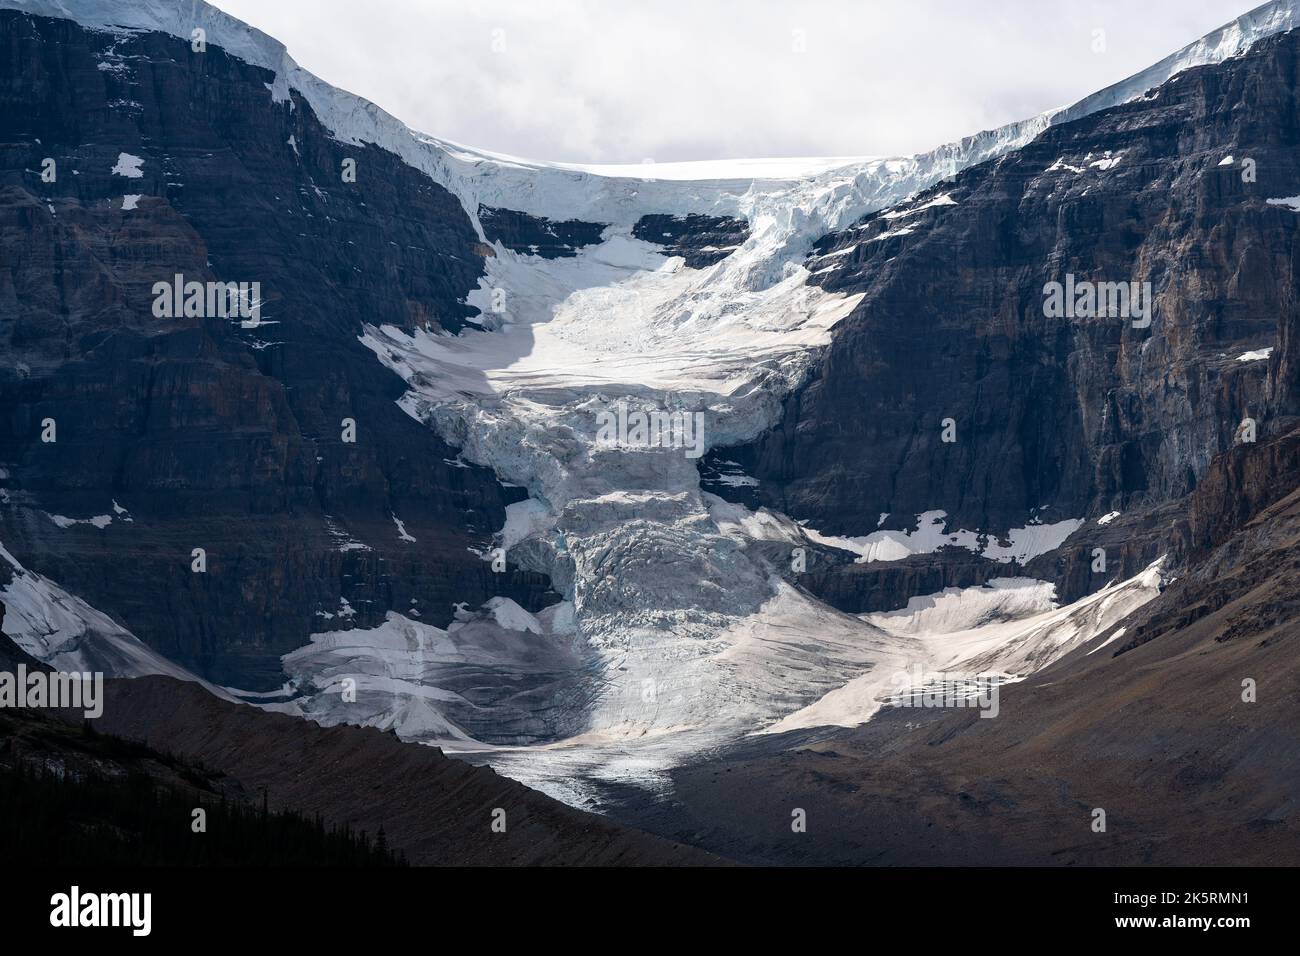 Snow dome glacier with Columbia Icefield on top, Jasper national park, Alberta, Canada. Stock Photo